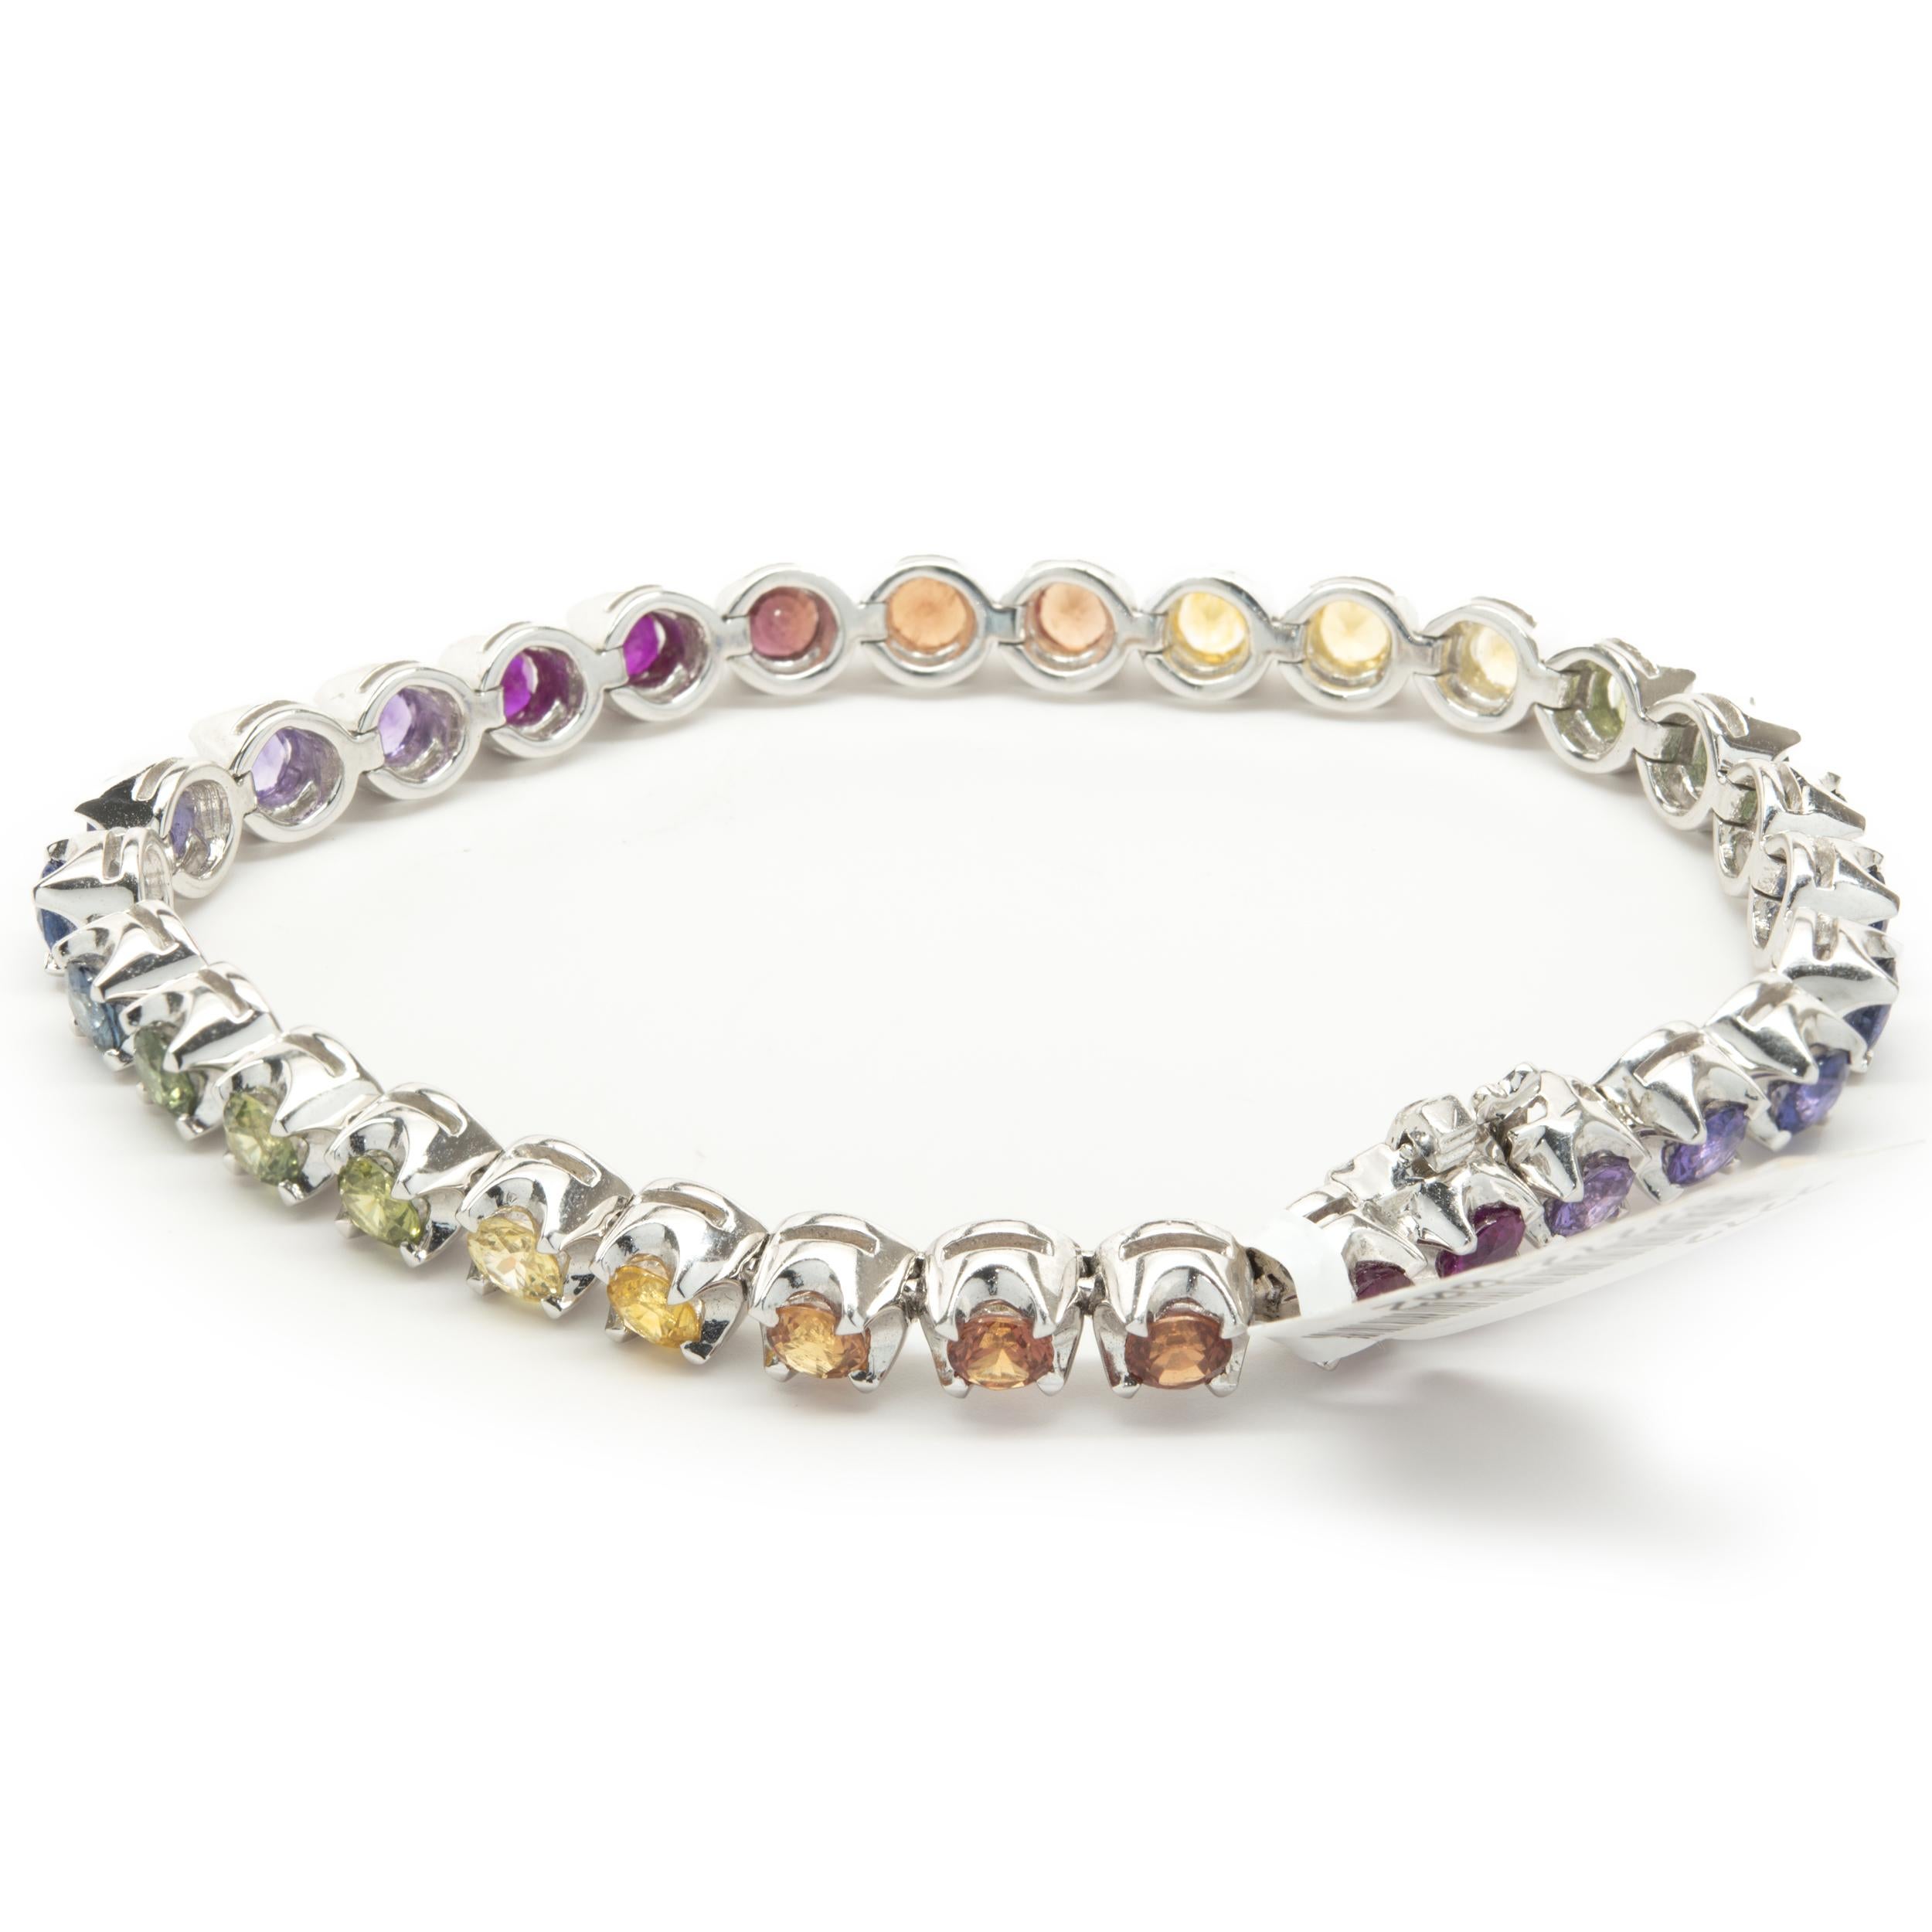 Designer: custom
Material: 18K white gold
Sapphire: 31 round brilliant cut = 9.18cttw
Color: Rainbow
Clarity: AAA+
Dimensions: bracelet will fit up to a 7-inch wrist
Weight: 24.95 grams